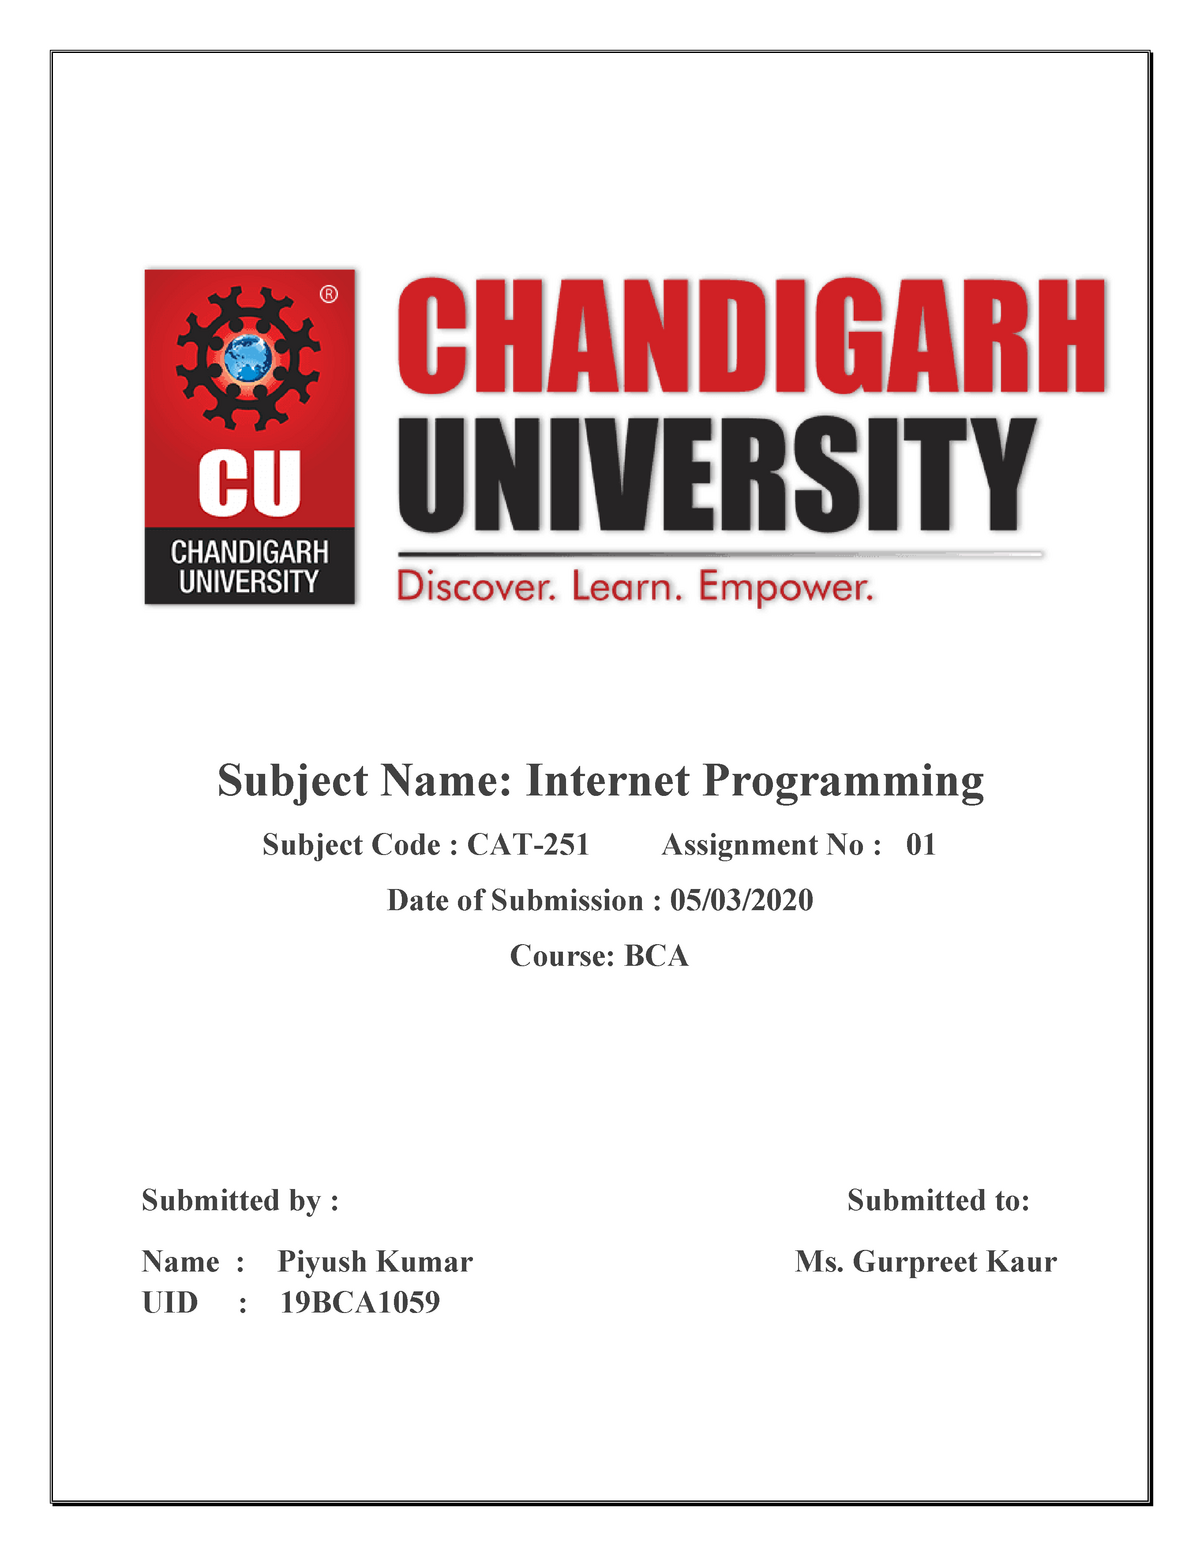 chandigarh university assignment front page pdf